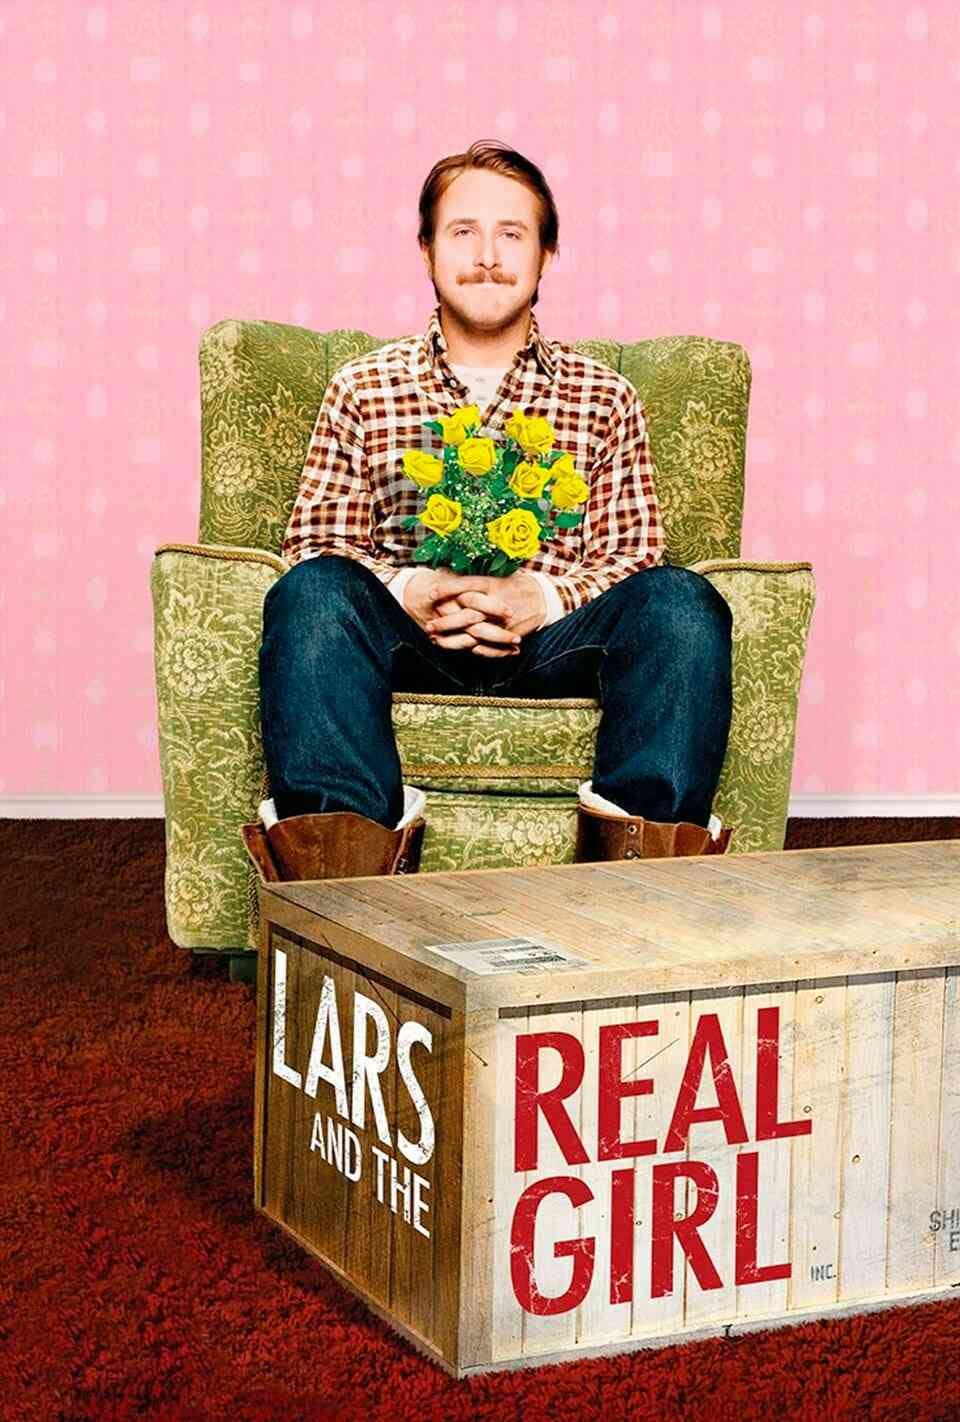 Read Lars and the Real Girl screenplay (poster)